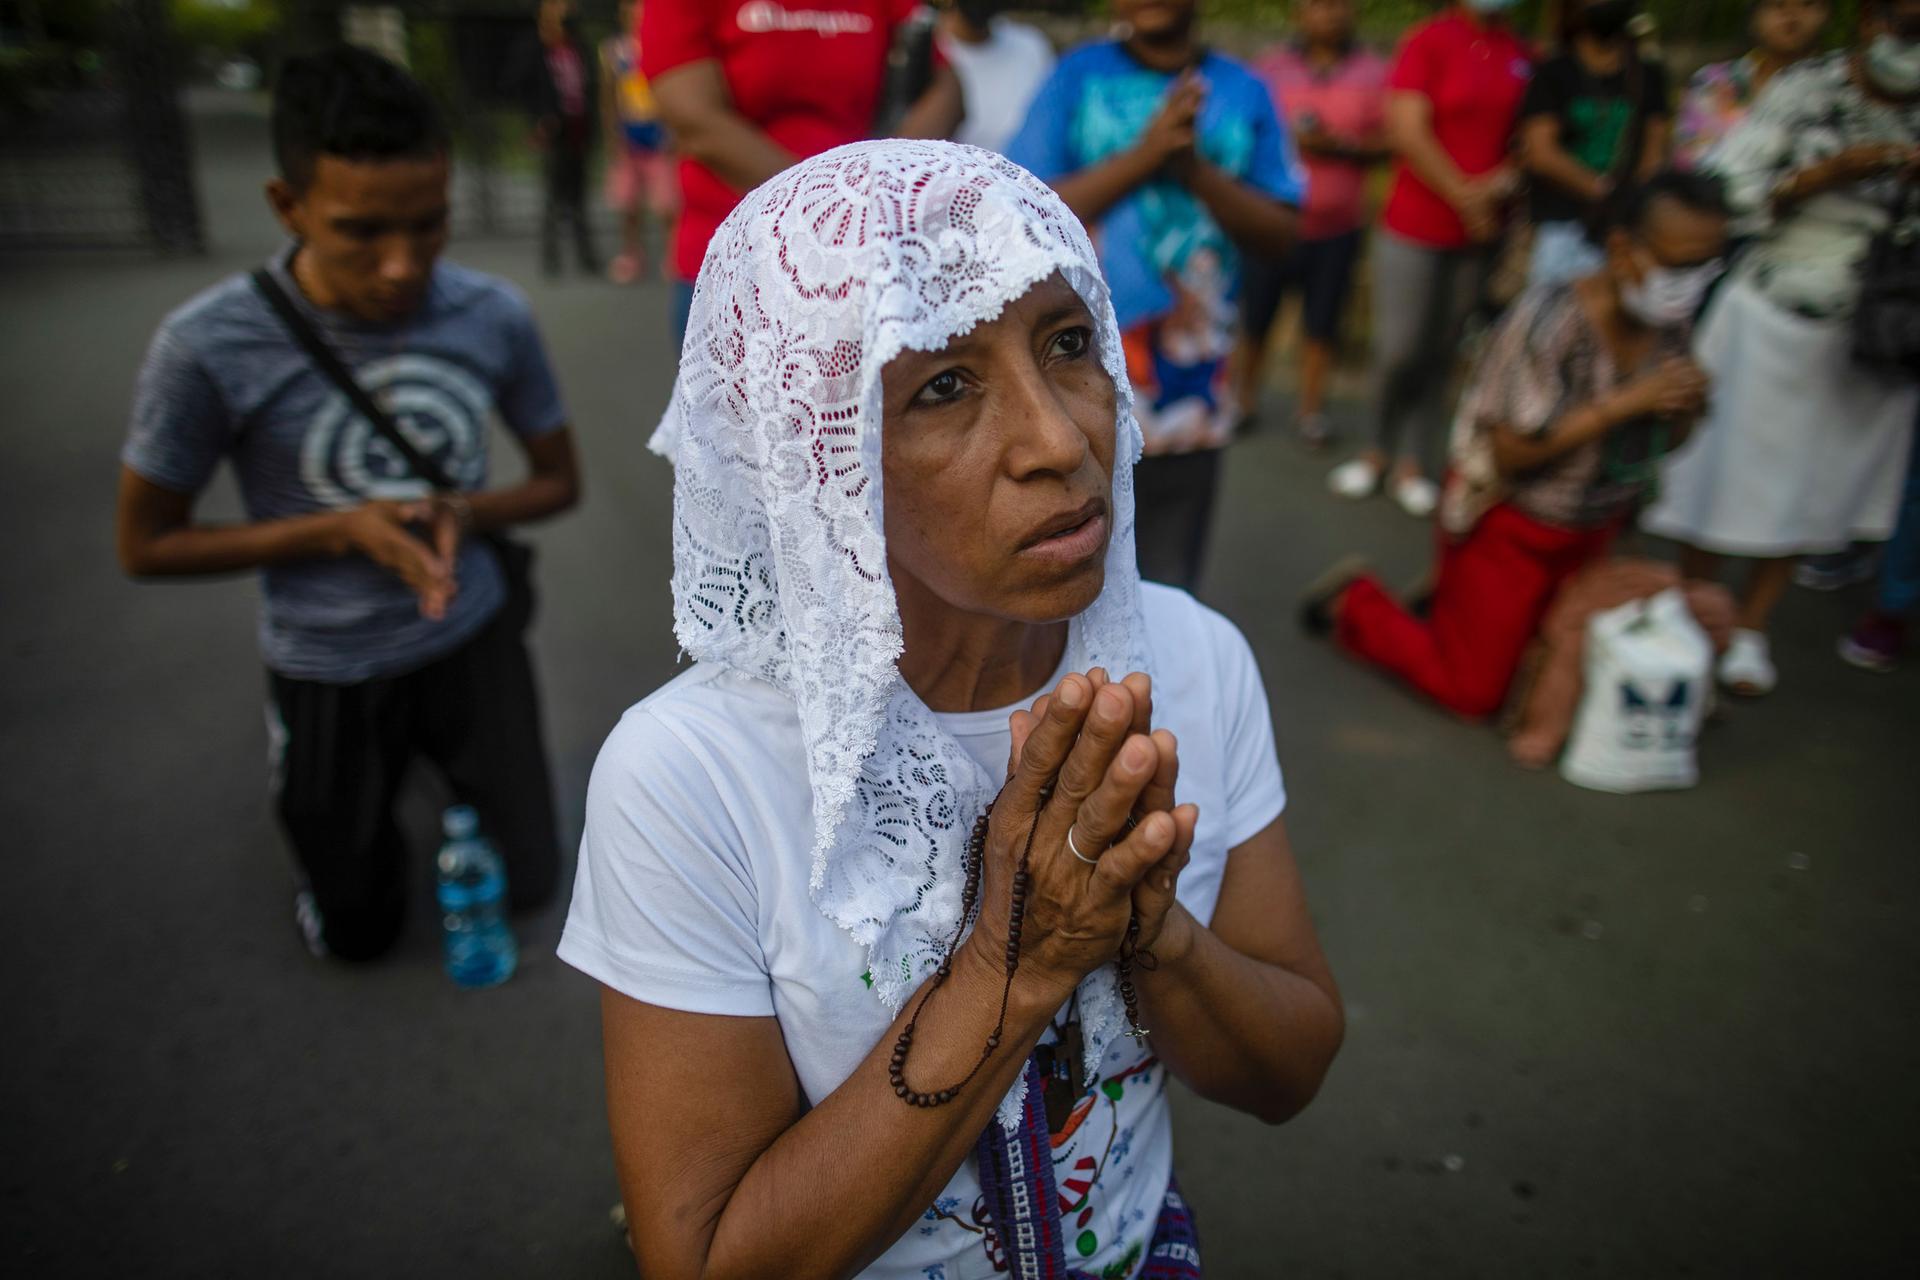 A woman takes part in a reenactment of the Stations of the Cross during the Lenten season at the Metropolitan Cathedral in Managua, Nicaragua, Friday, March 17, 2023.